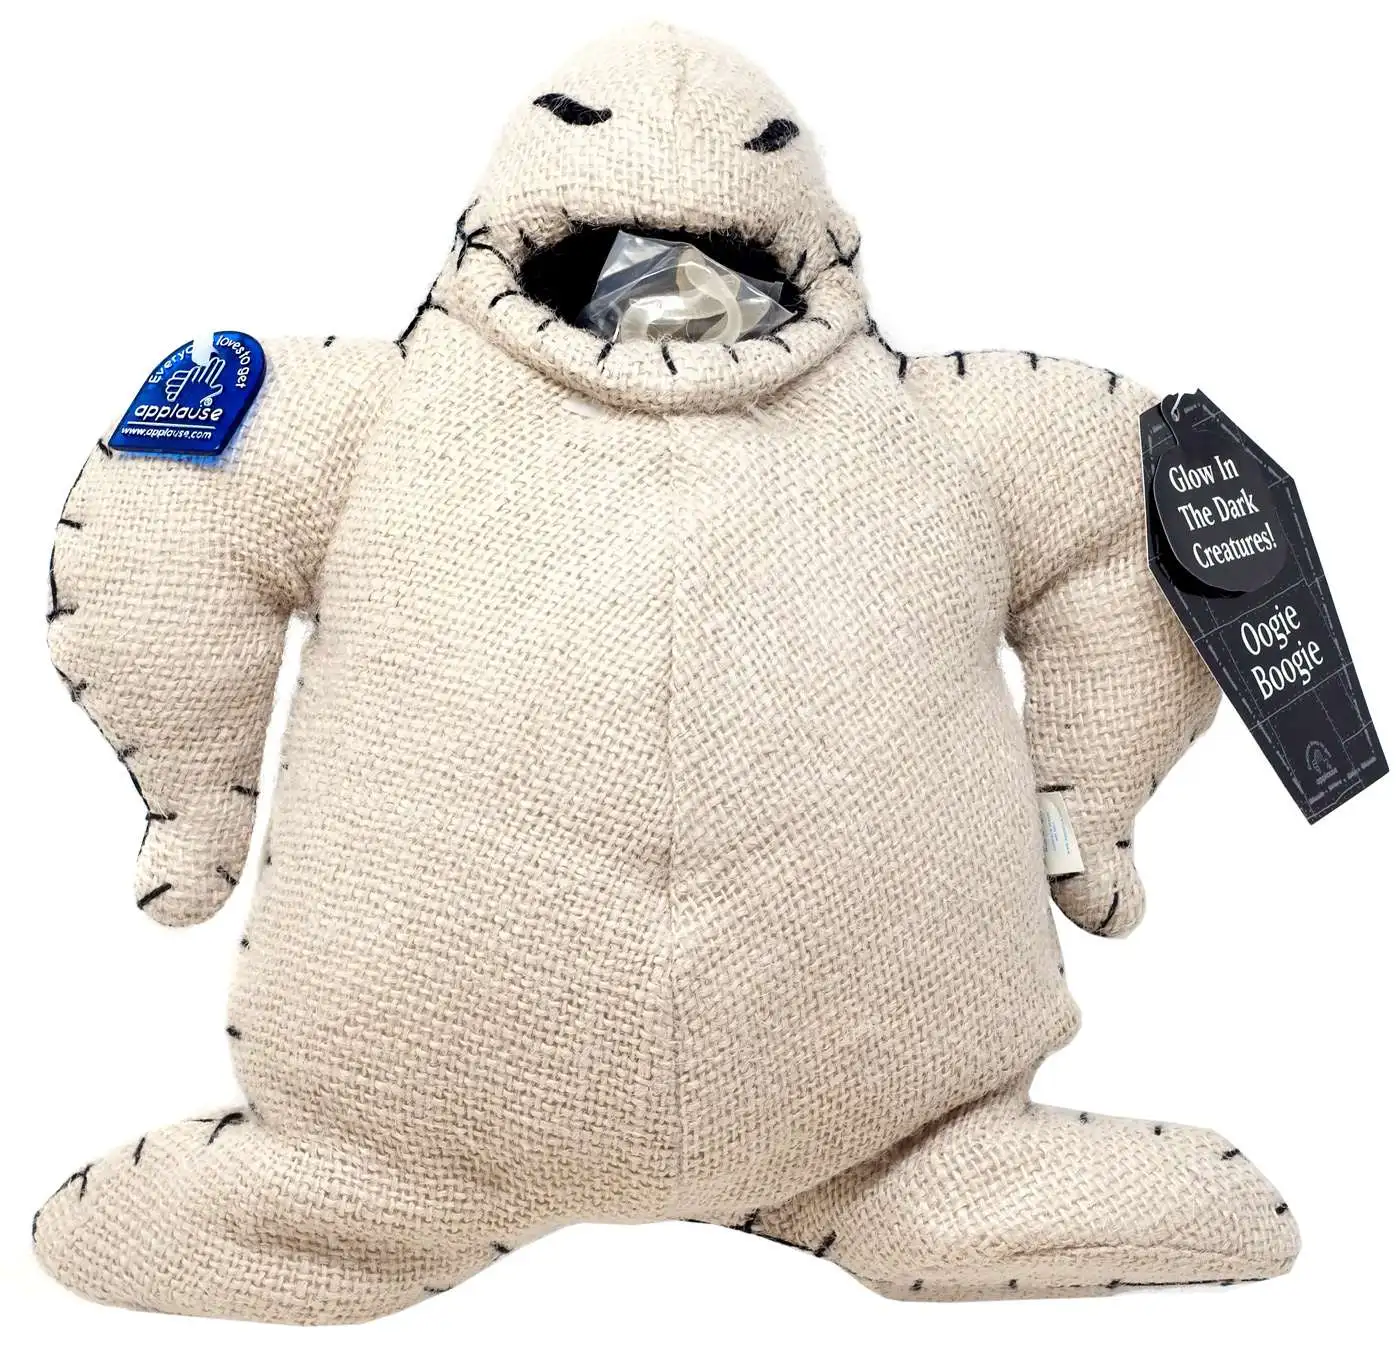 NWT Disney Oogie Boogie Wishable Plush Nightmare Before Christmas Limted Release 